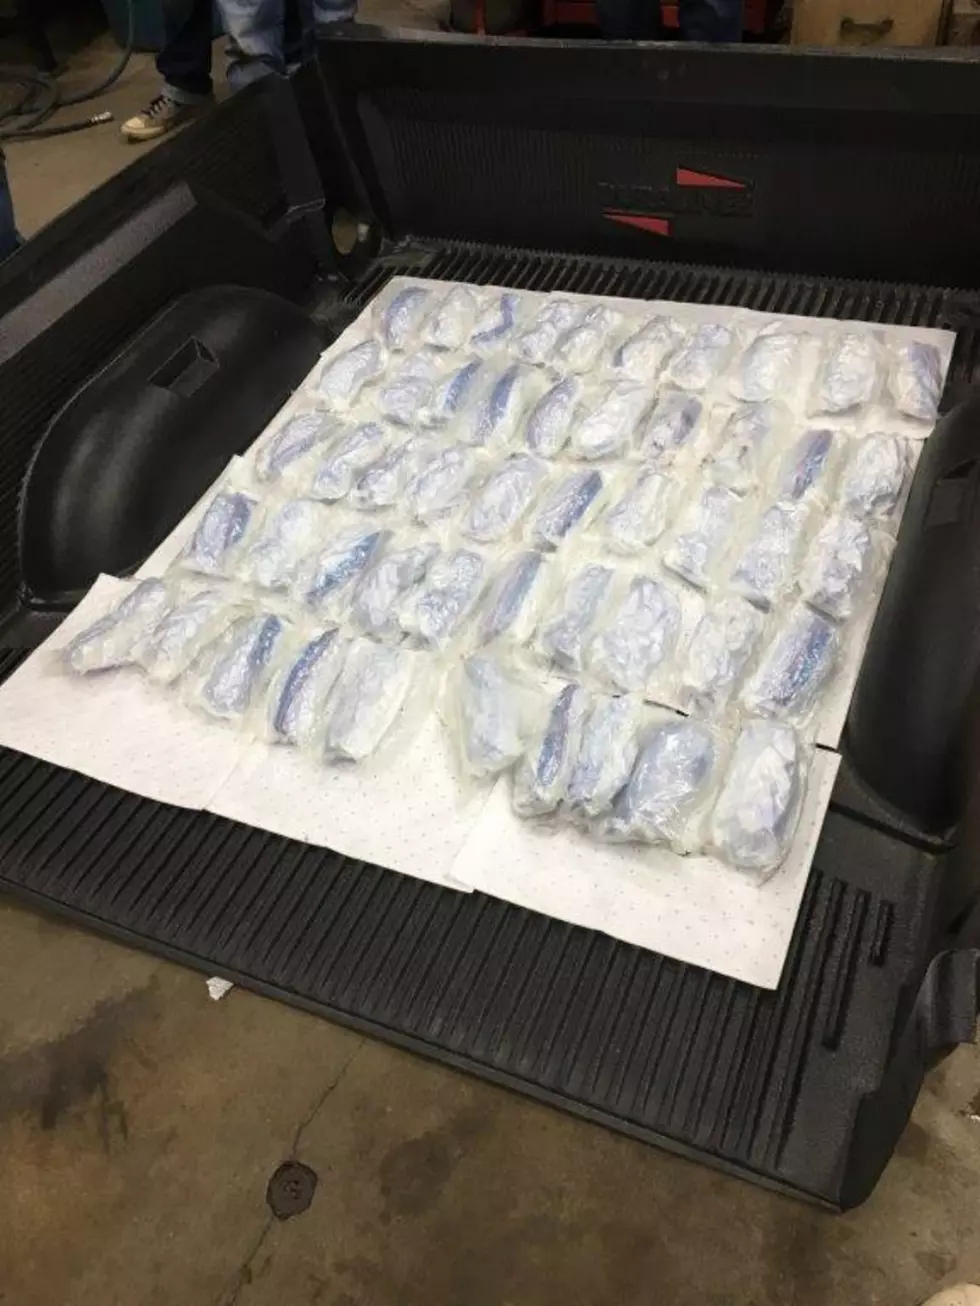 Rochester Meth Bust &#8216;Largest Ever&#8217; in Southeast Minnesota